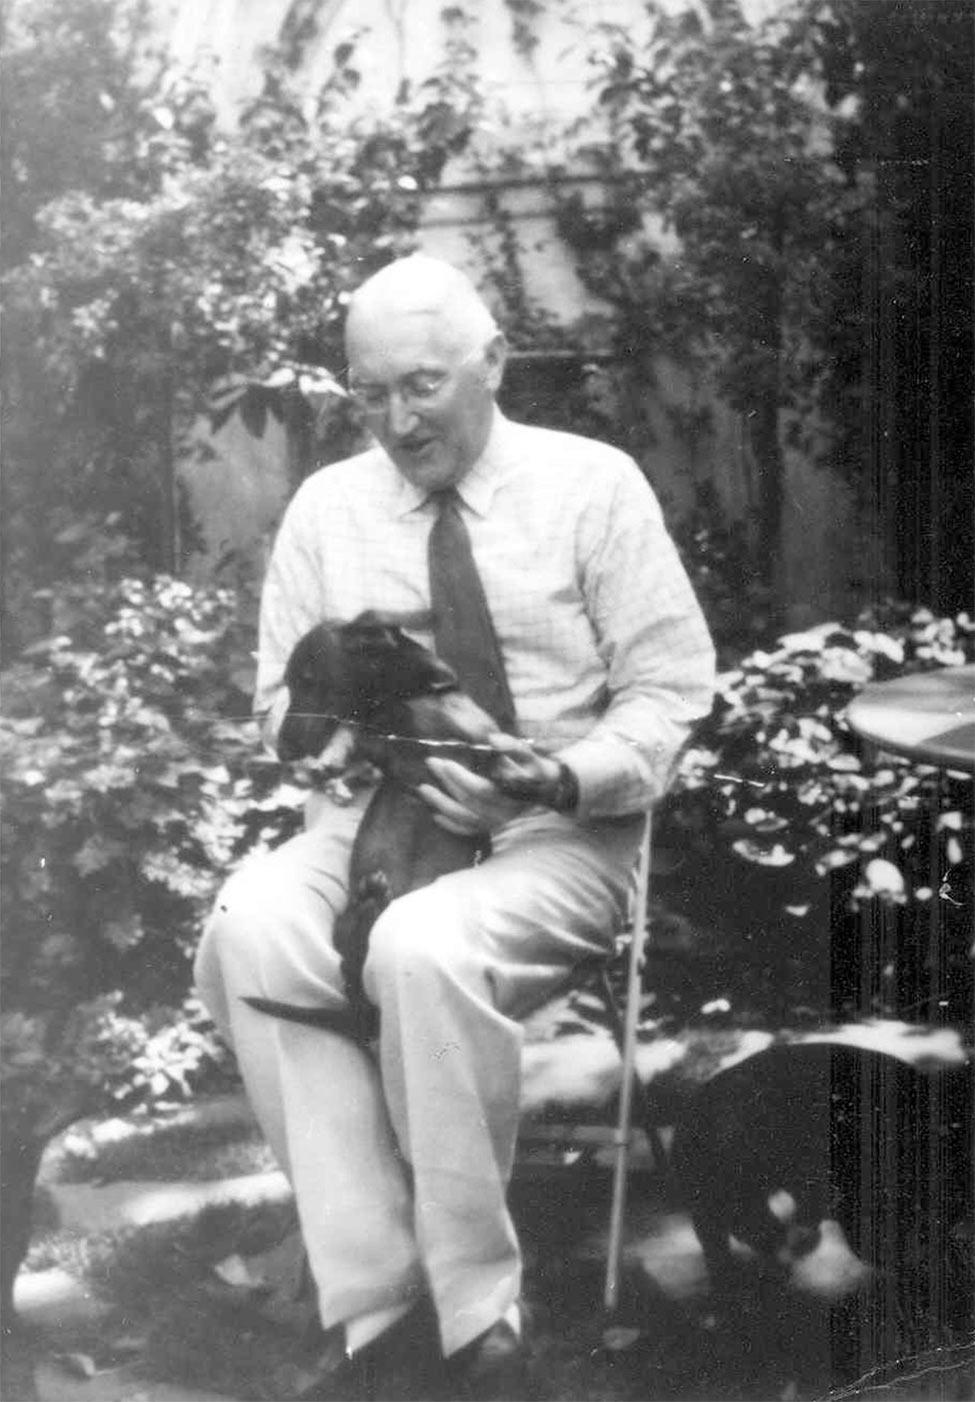 Homer Pace in his later years with the family dog